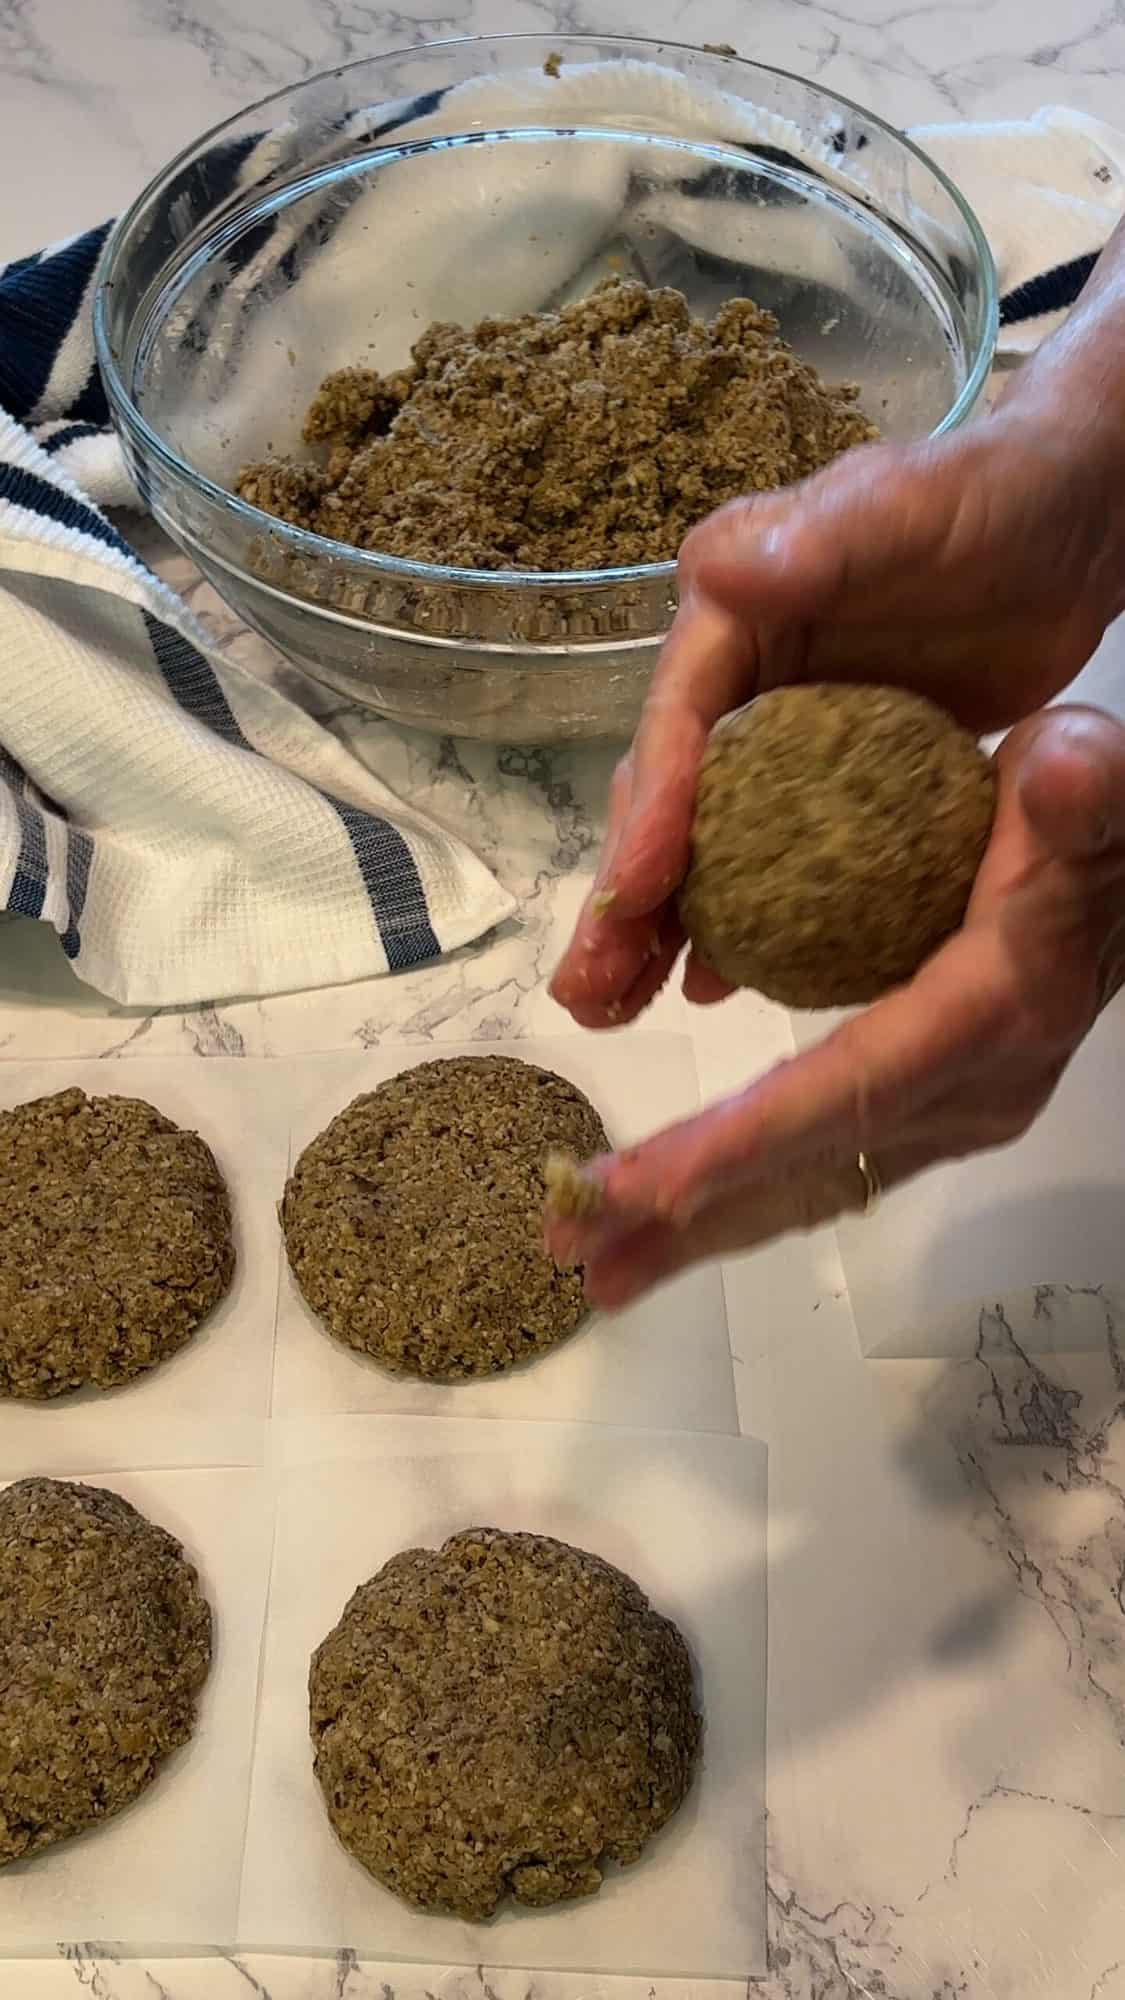 Forming the patties.